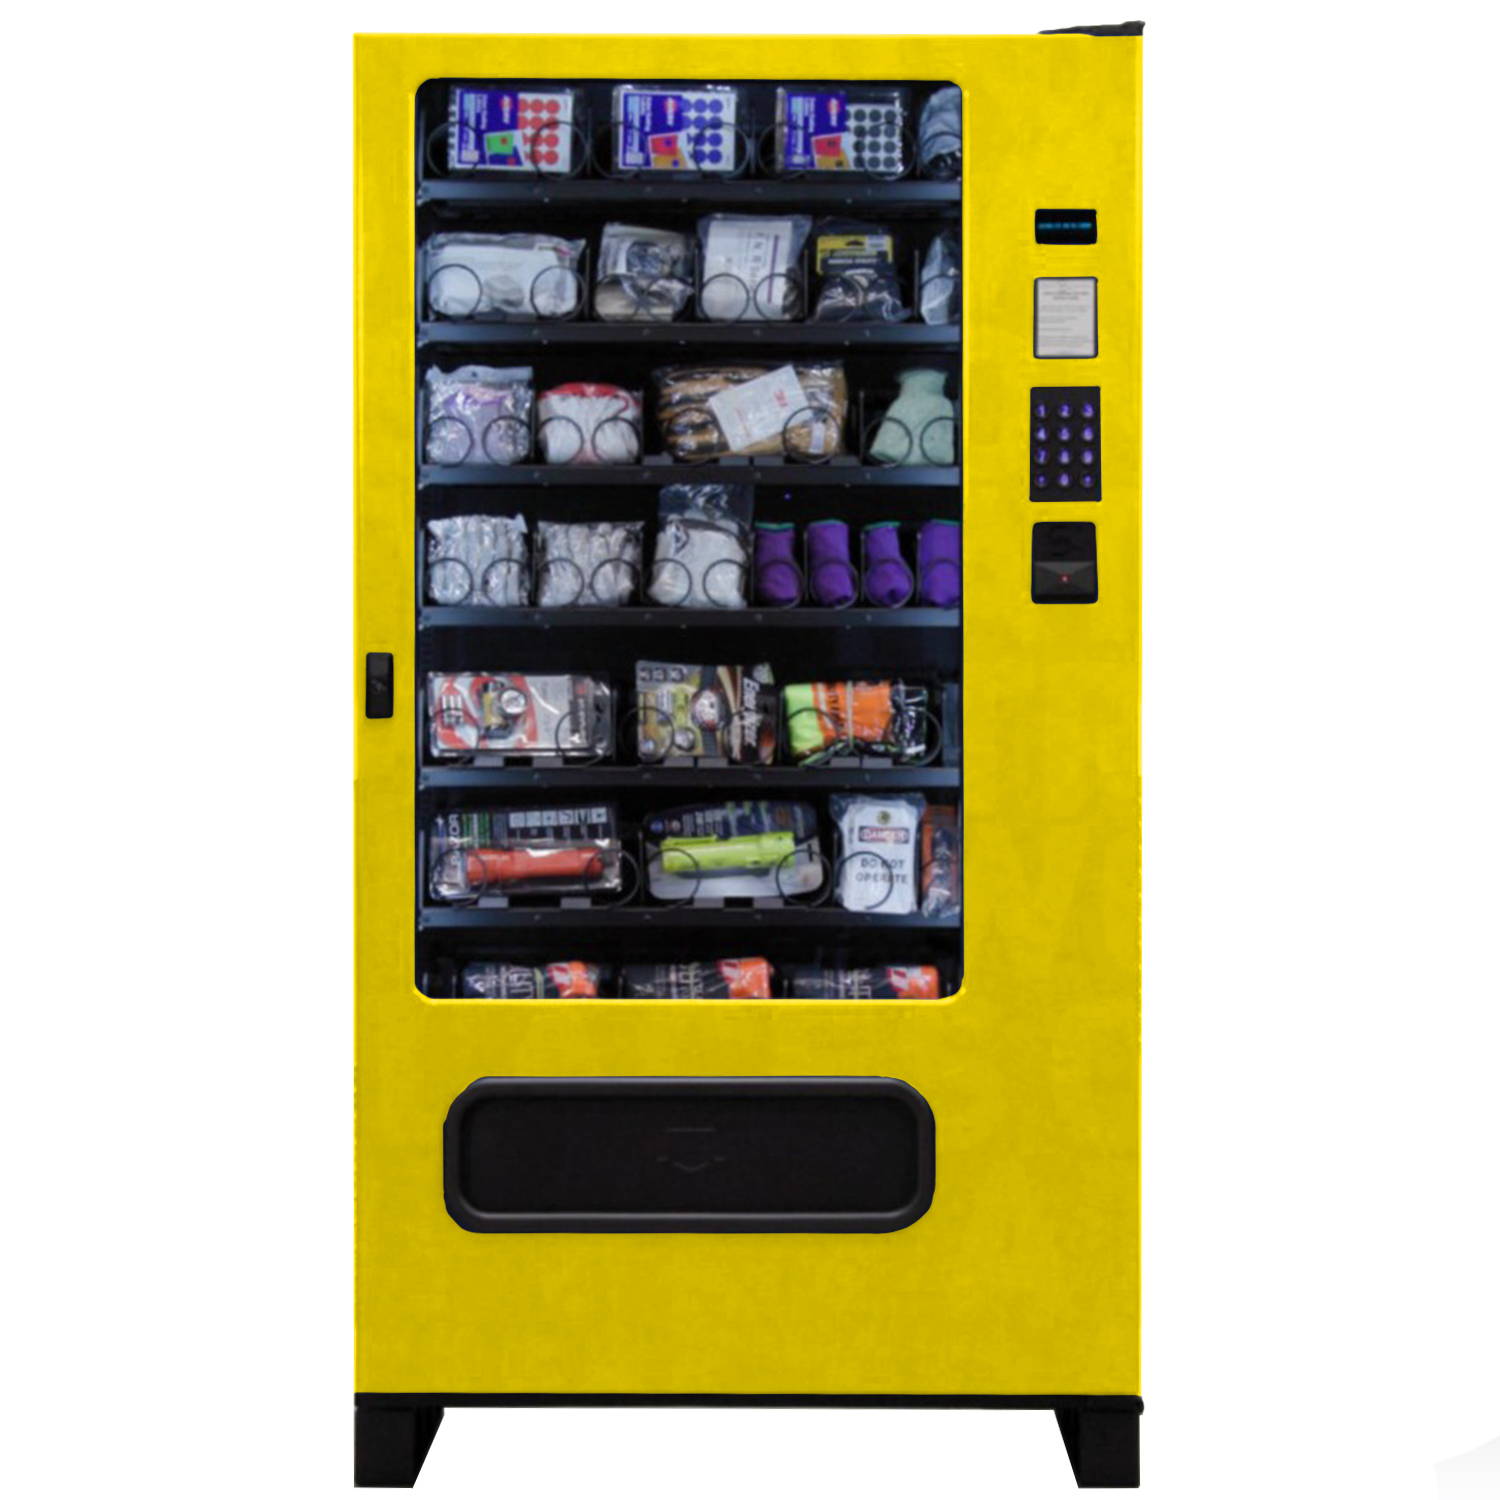 Industrial PPE Vending machine with PPE supplies.